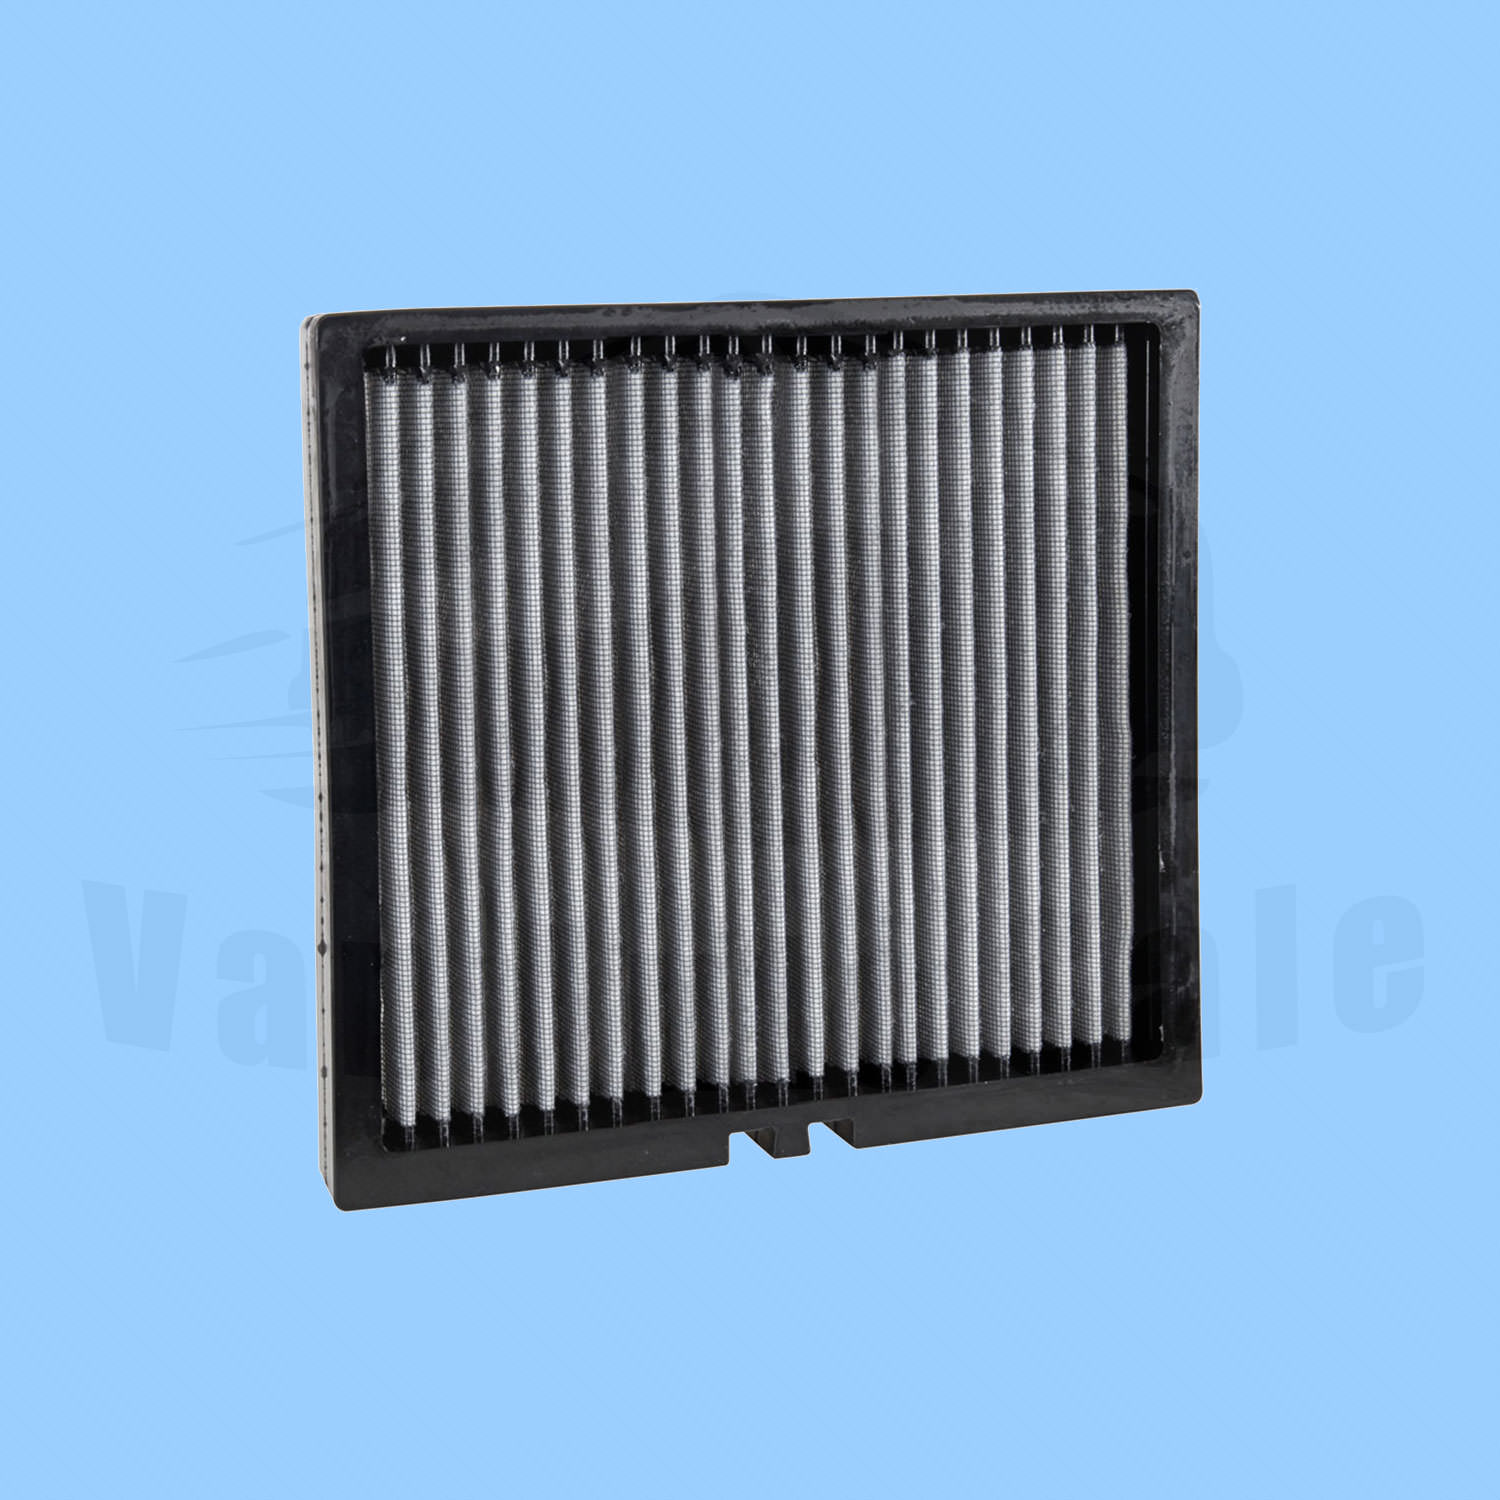 Cabin Air Filter K&N for Jeep Grand Cherokee 2011-2020 | eBay 2020 Jeep Grand Cherokee Cabin Air Filter